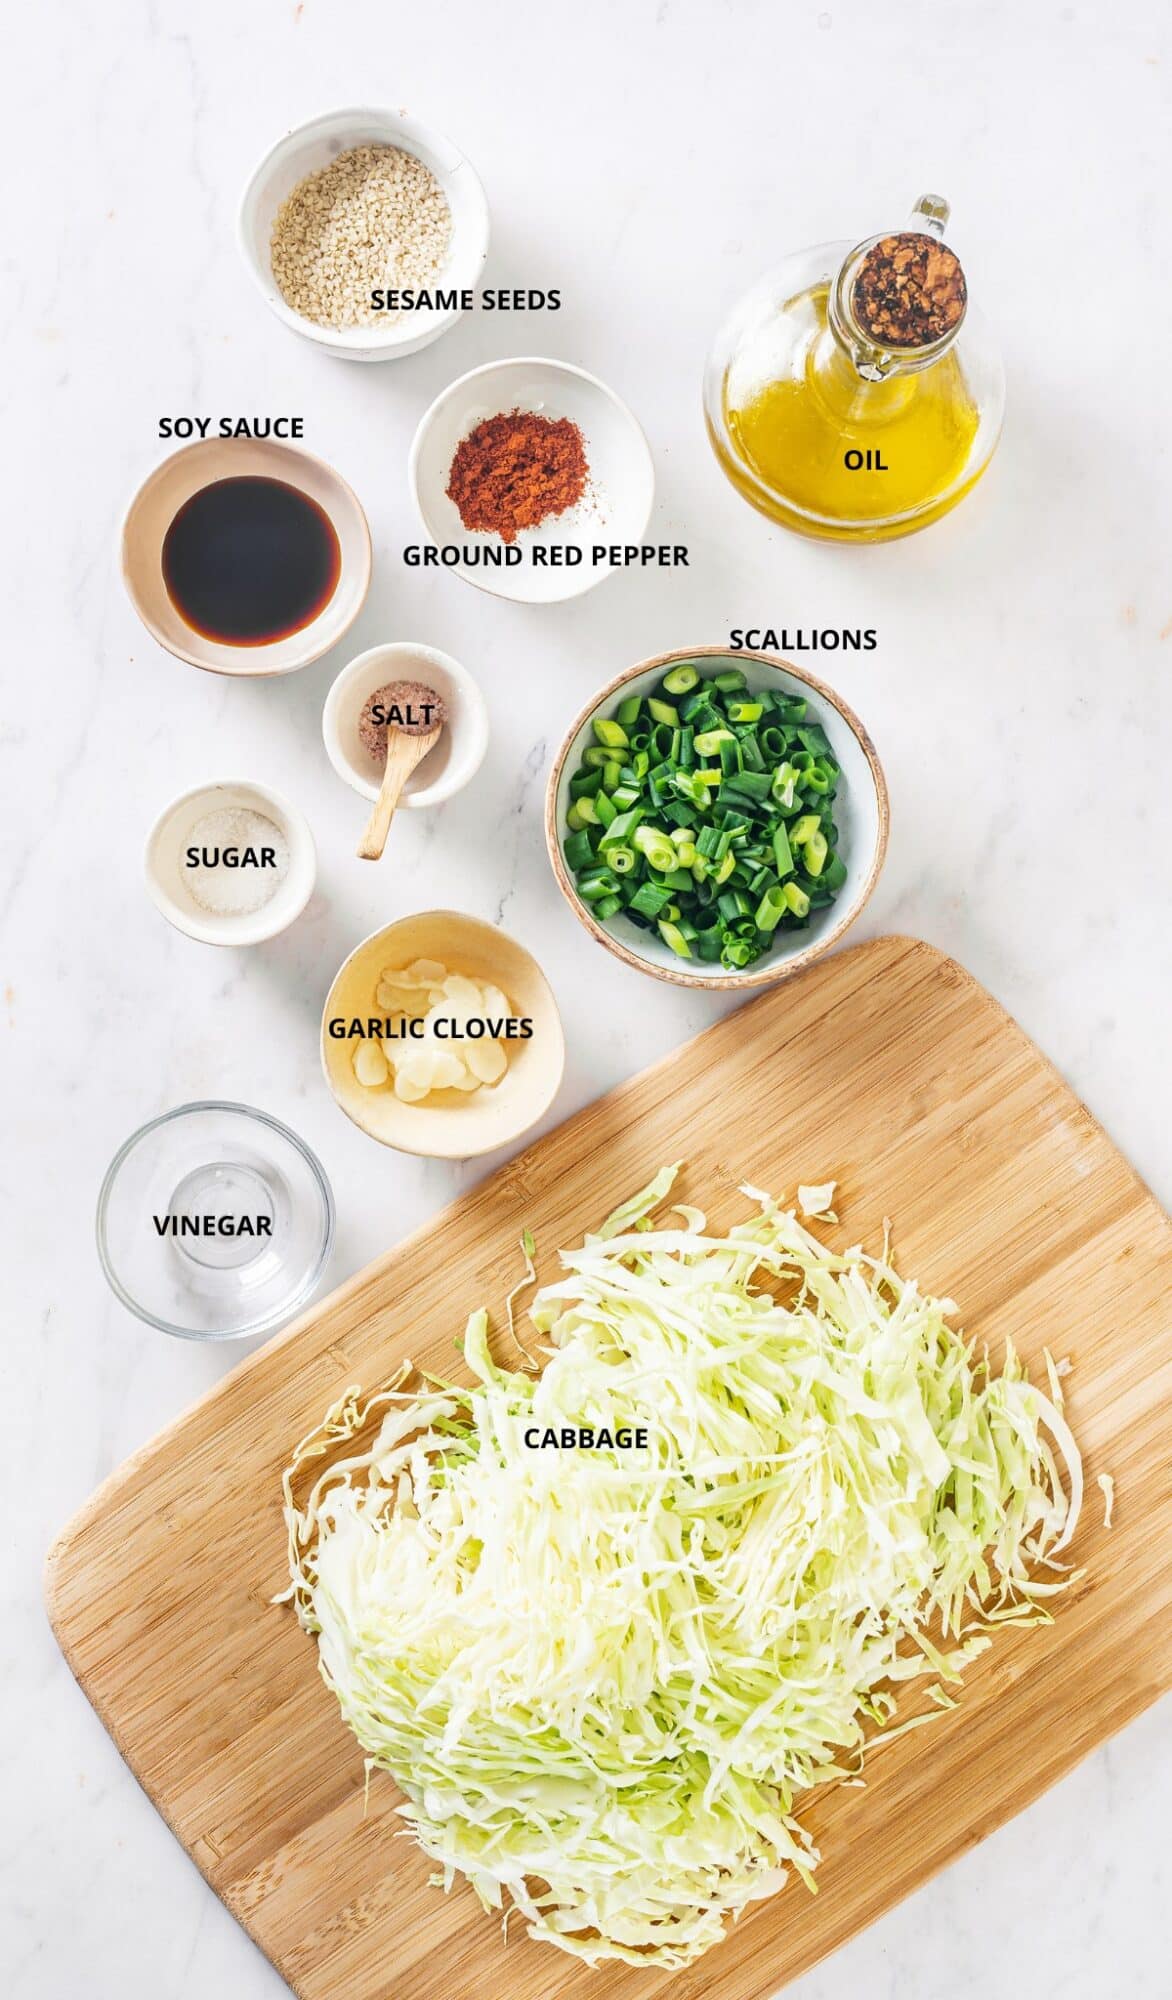 shredded green cabbage on wooden board, chopped green scallions, olive oil, soy sauce, sugar, sliced garlic cloves, vinegar, powdered red pepper in individual containers. 